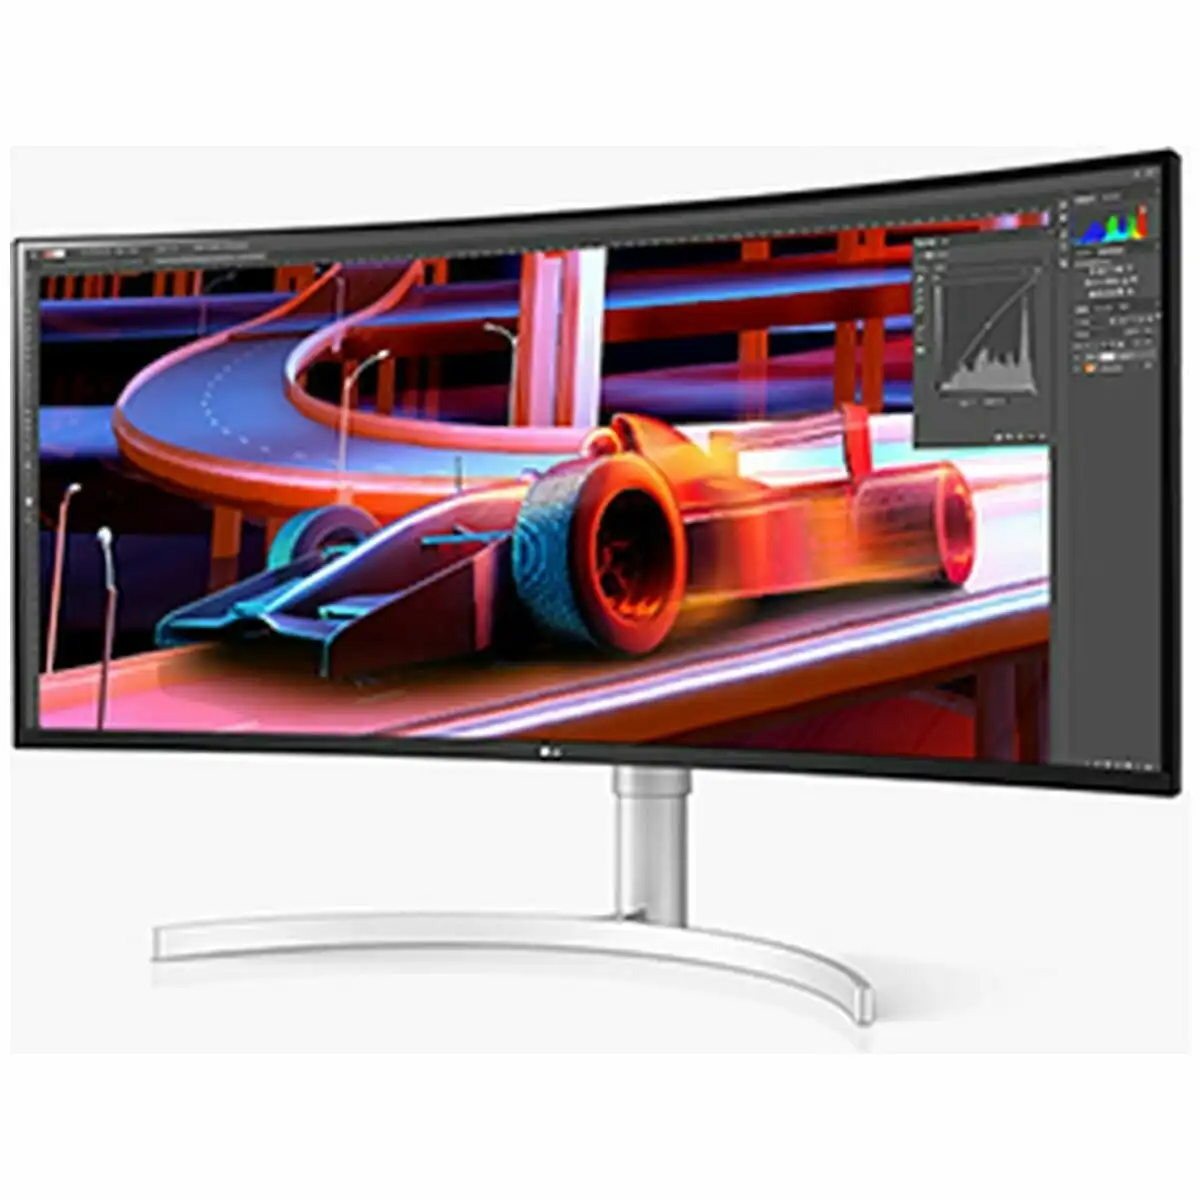 LG 38 Inch UltraWide QHD Plus IPS Curved Monitor NVIDIA G-SYNC Compatibility